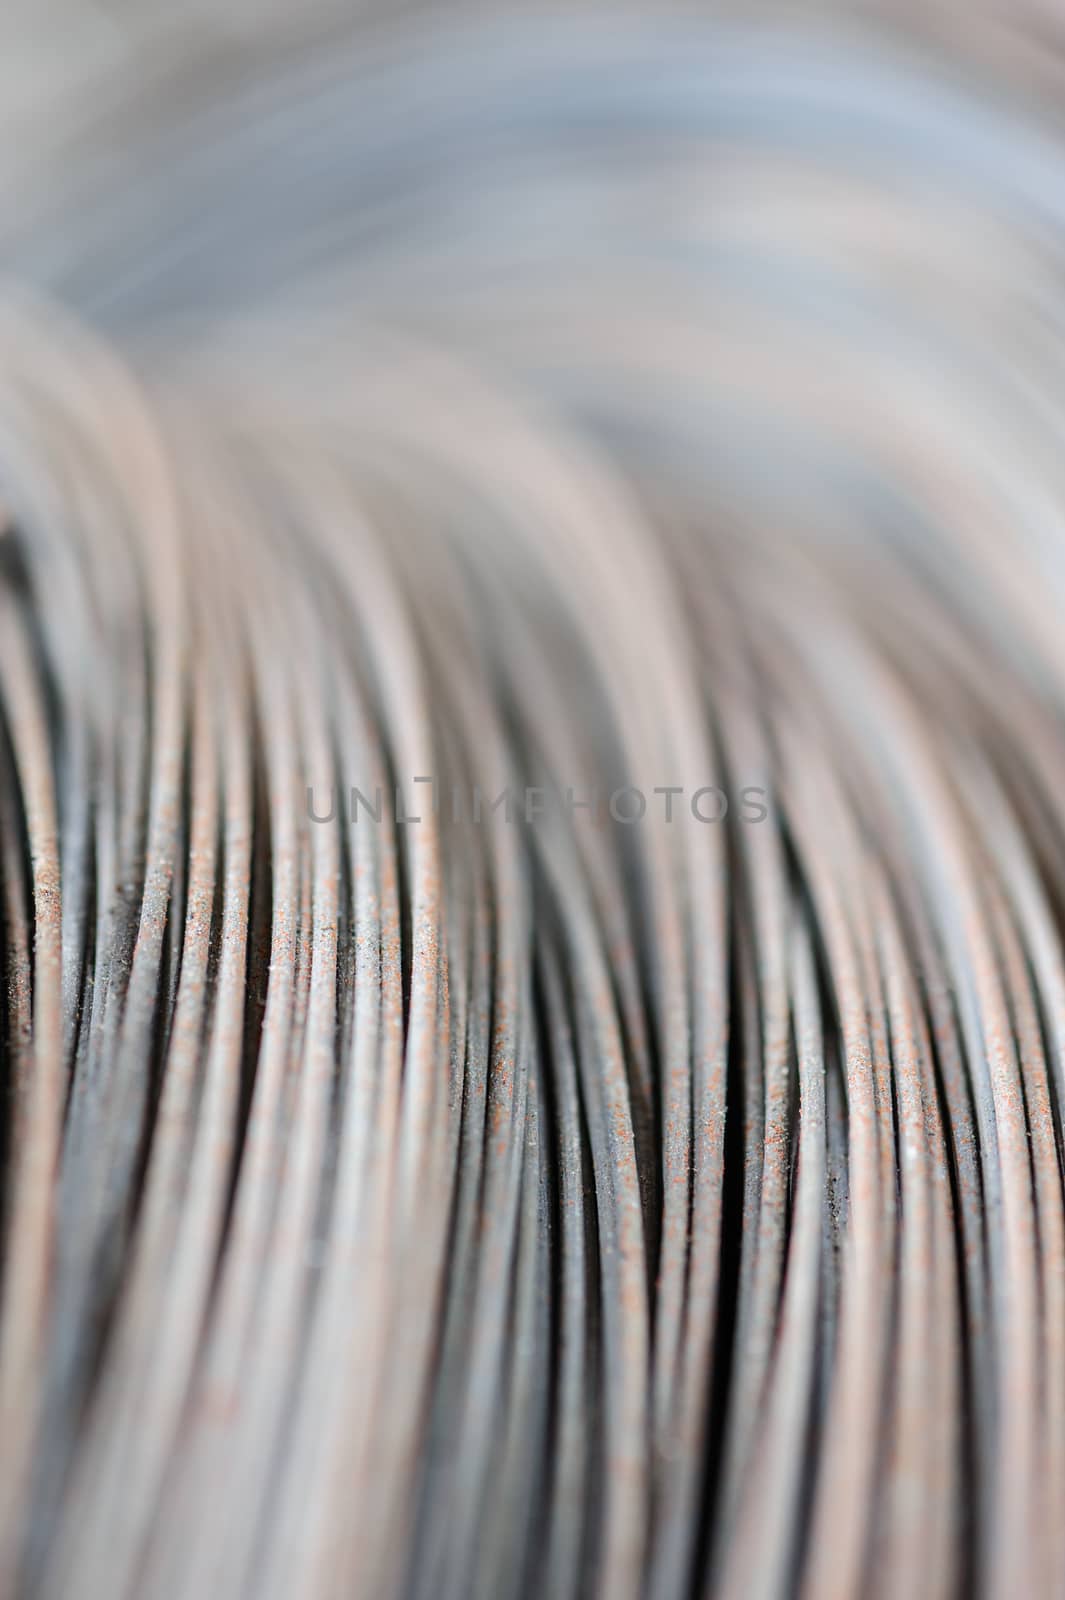 hank of metal wire, selective focus, usable as background